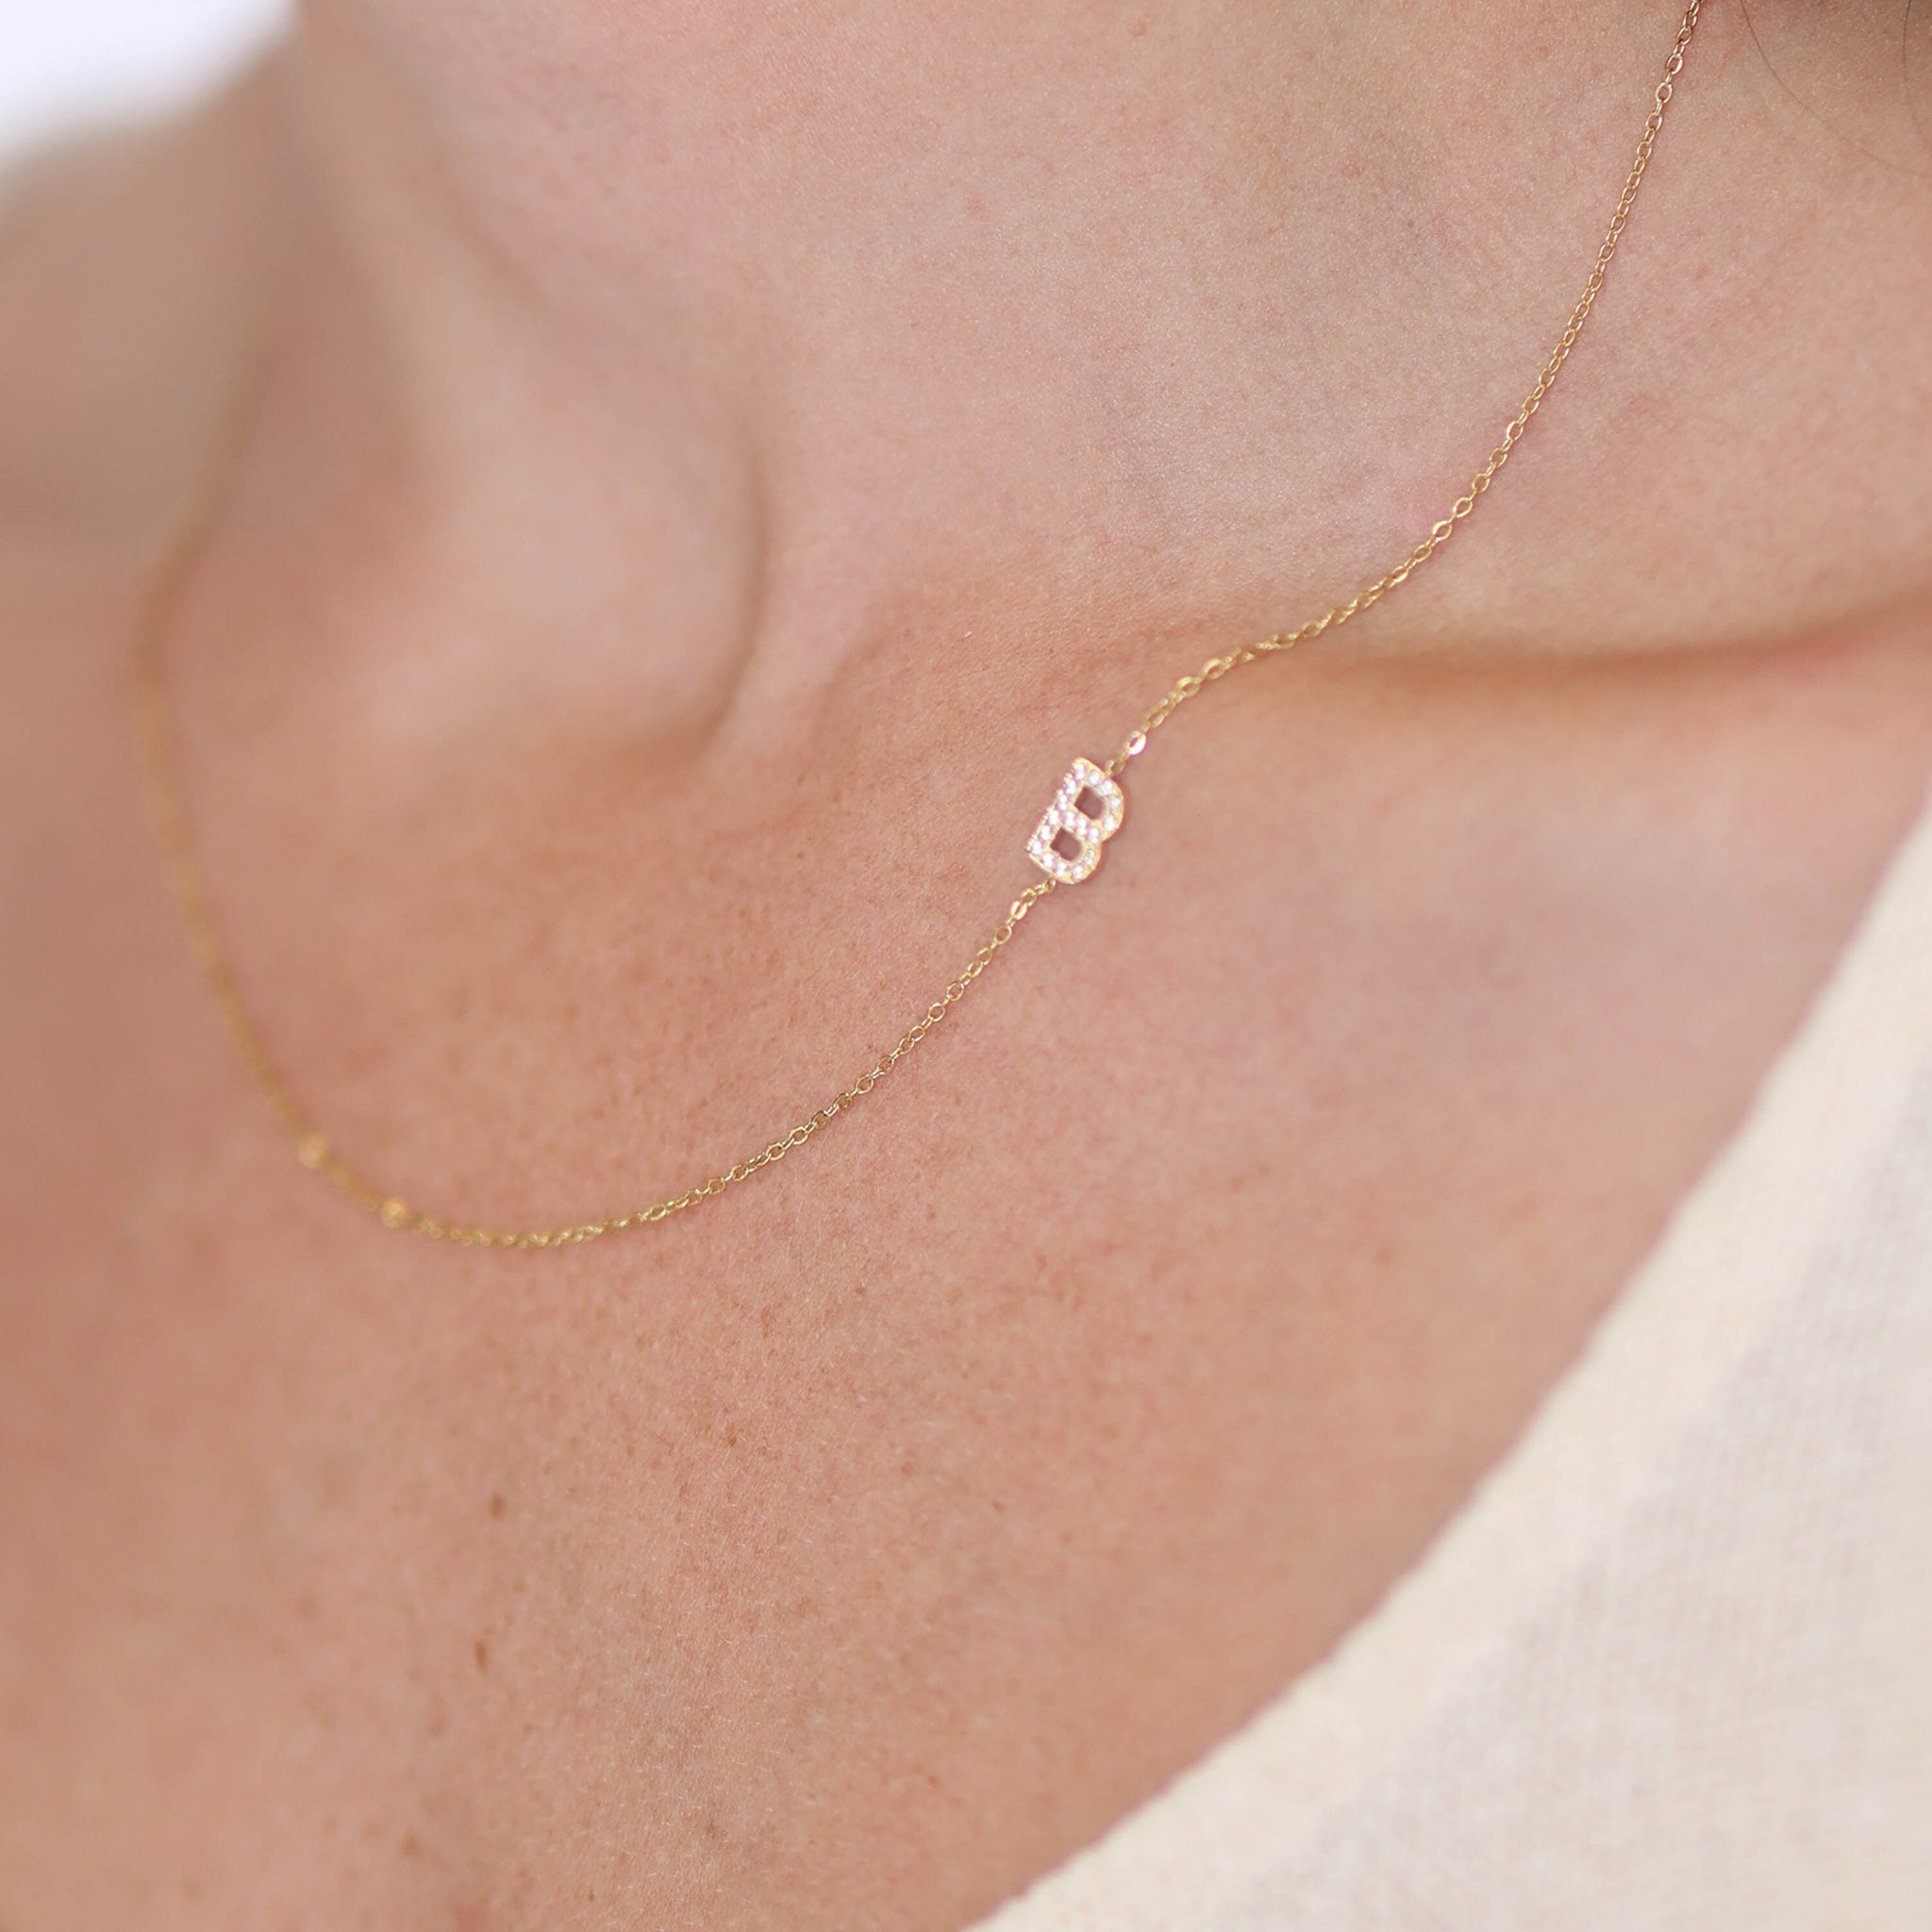 Dainty sideways initial necklace in Yellow Gold, Rose Gold or White Gold.